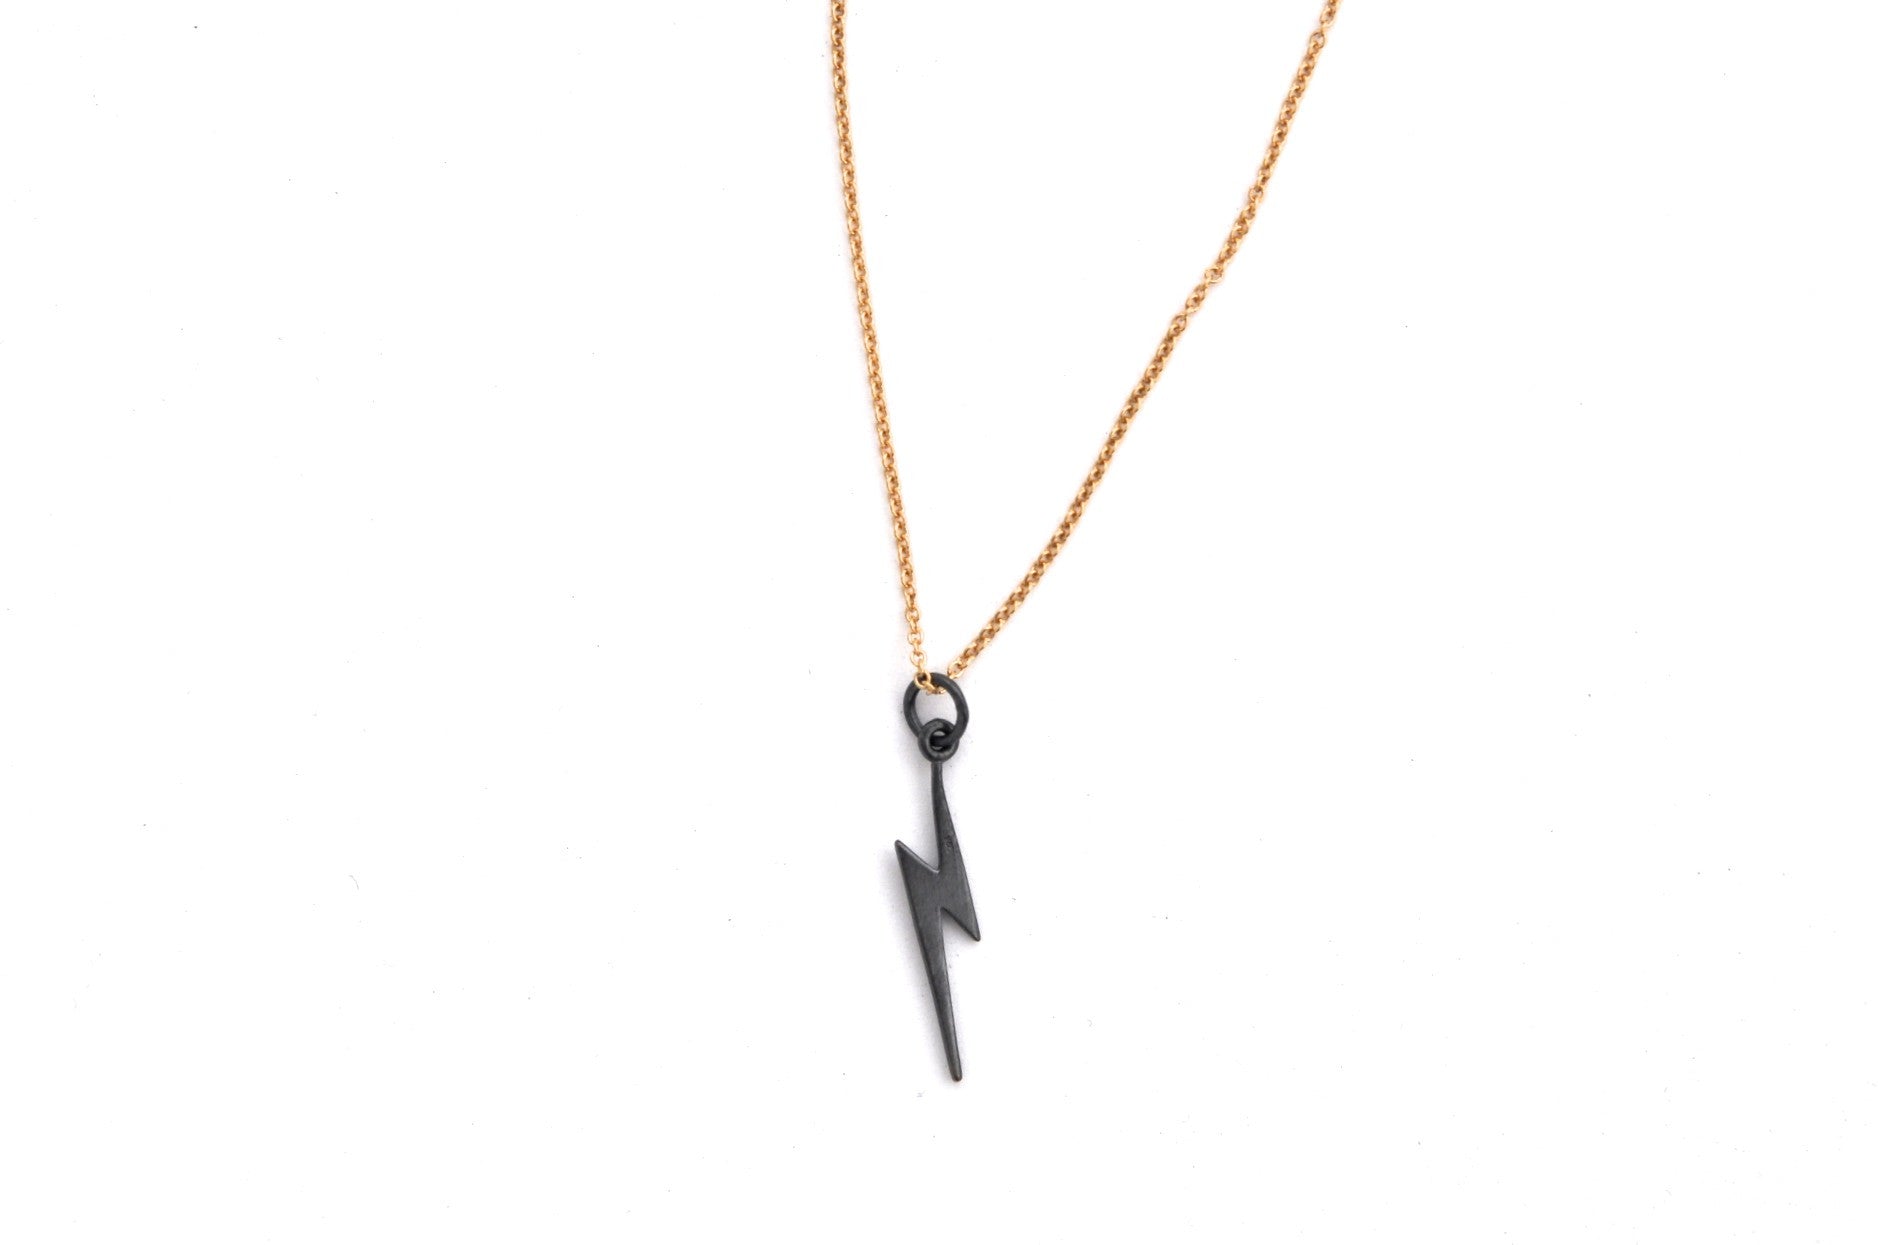 necklace / silver tiny LIGHTNING BOLT charm on fine chain – LOST WAX STUDIO  NYC - made in nyc